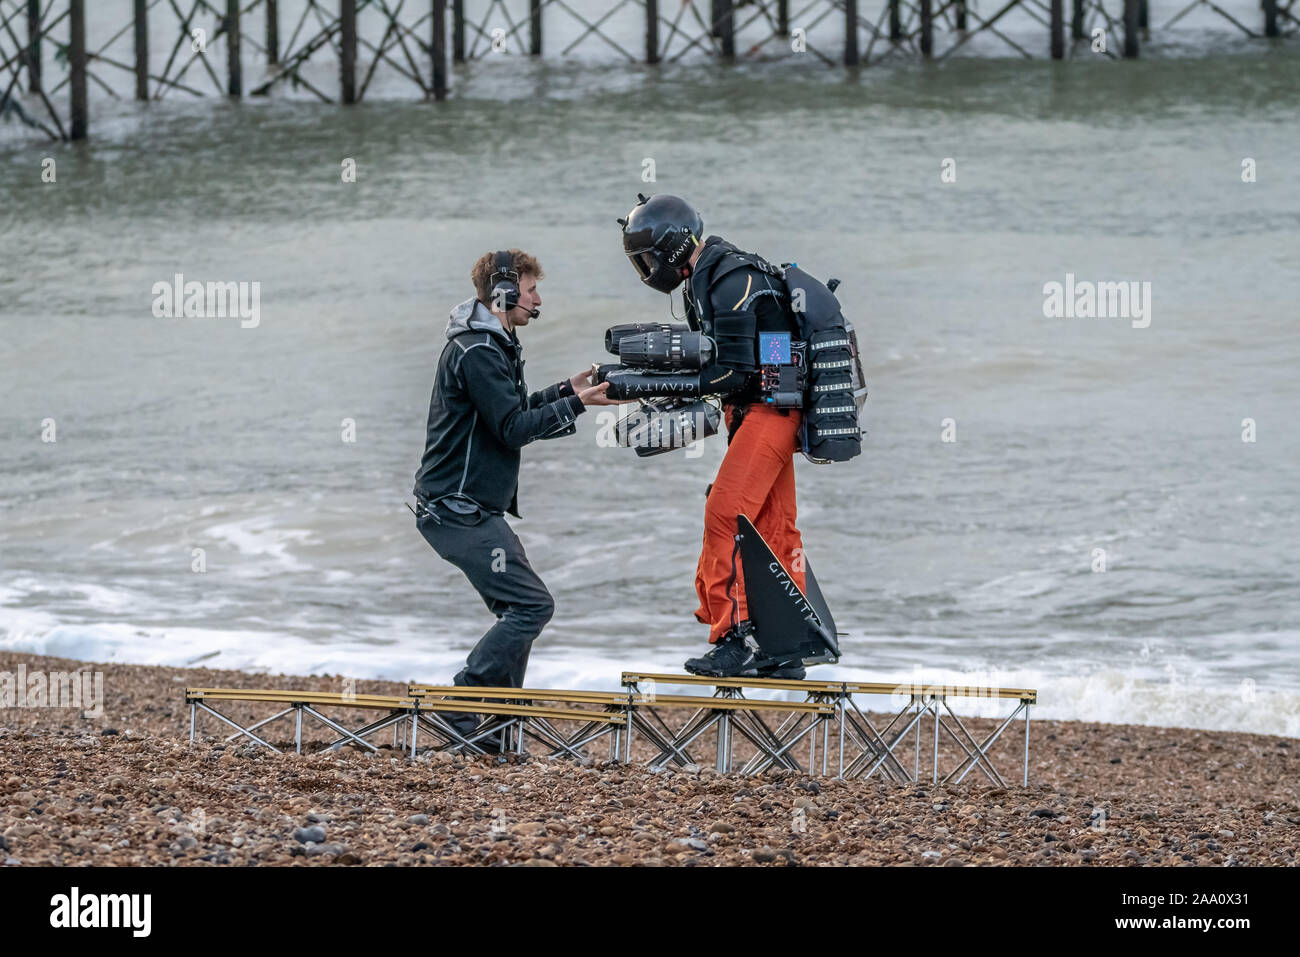 Richard Browning “Iron Man”, founder of Gravity Industries, makes a record-breaking flight in his body-controlled jet-powered suit over Brighton Pier. Stock Photo